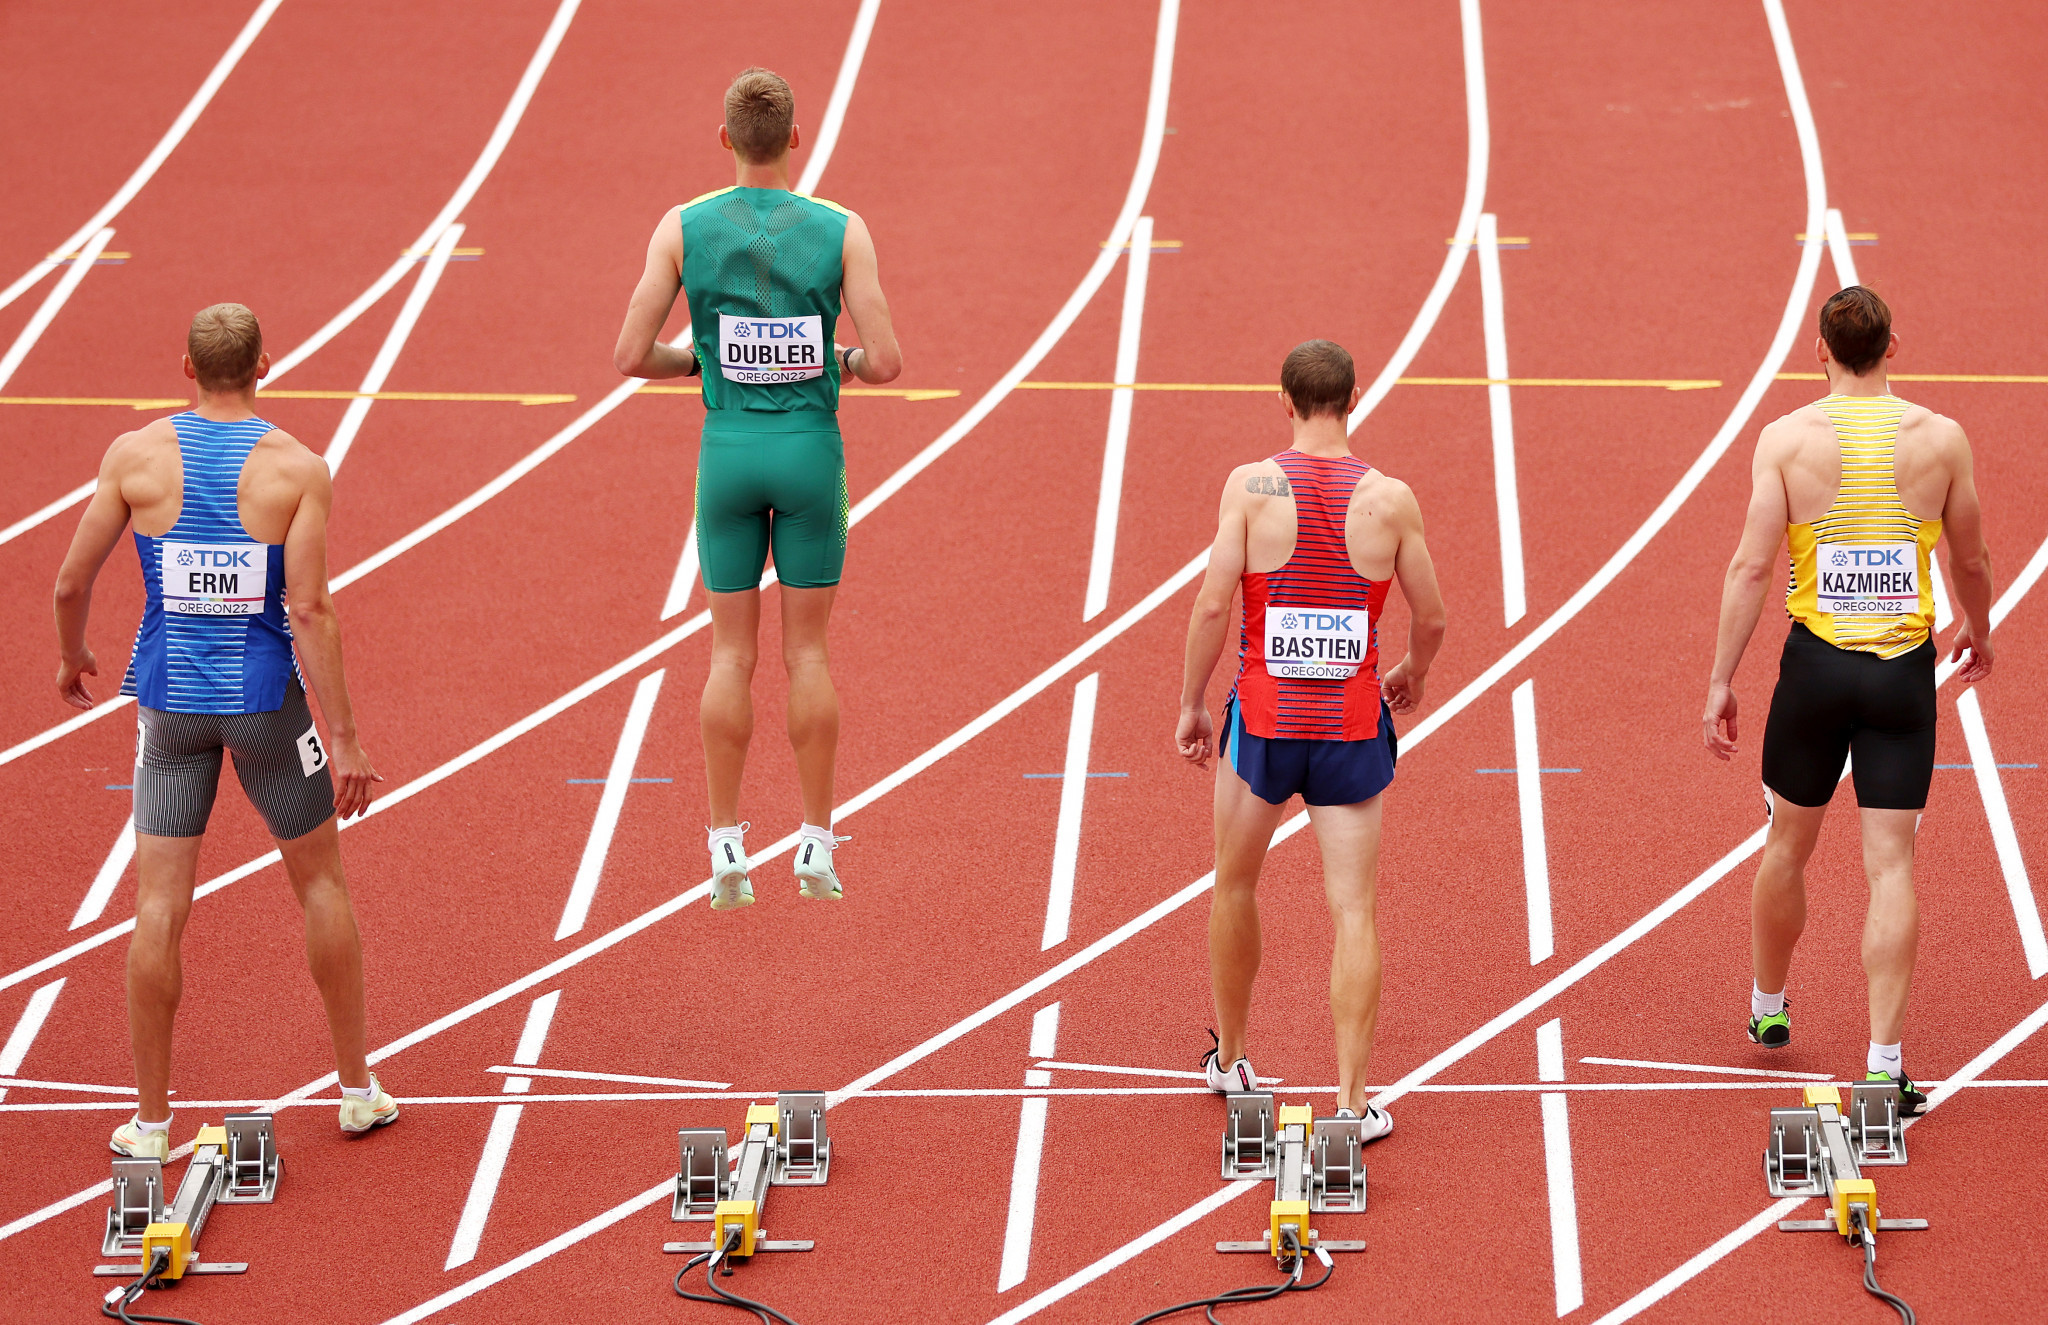 Decathlon competition got underway on the penultimate day of the Championships with the men's 100 metres ©Getty Images